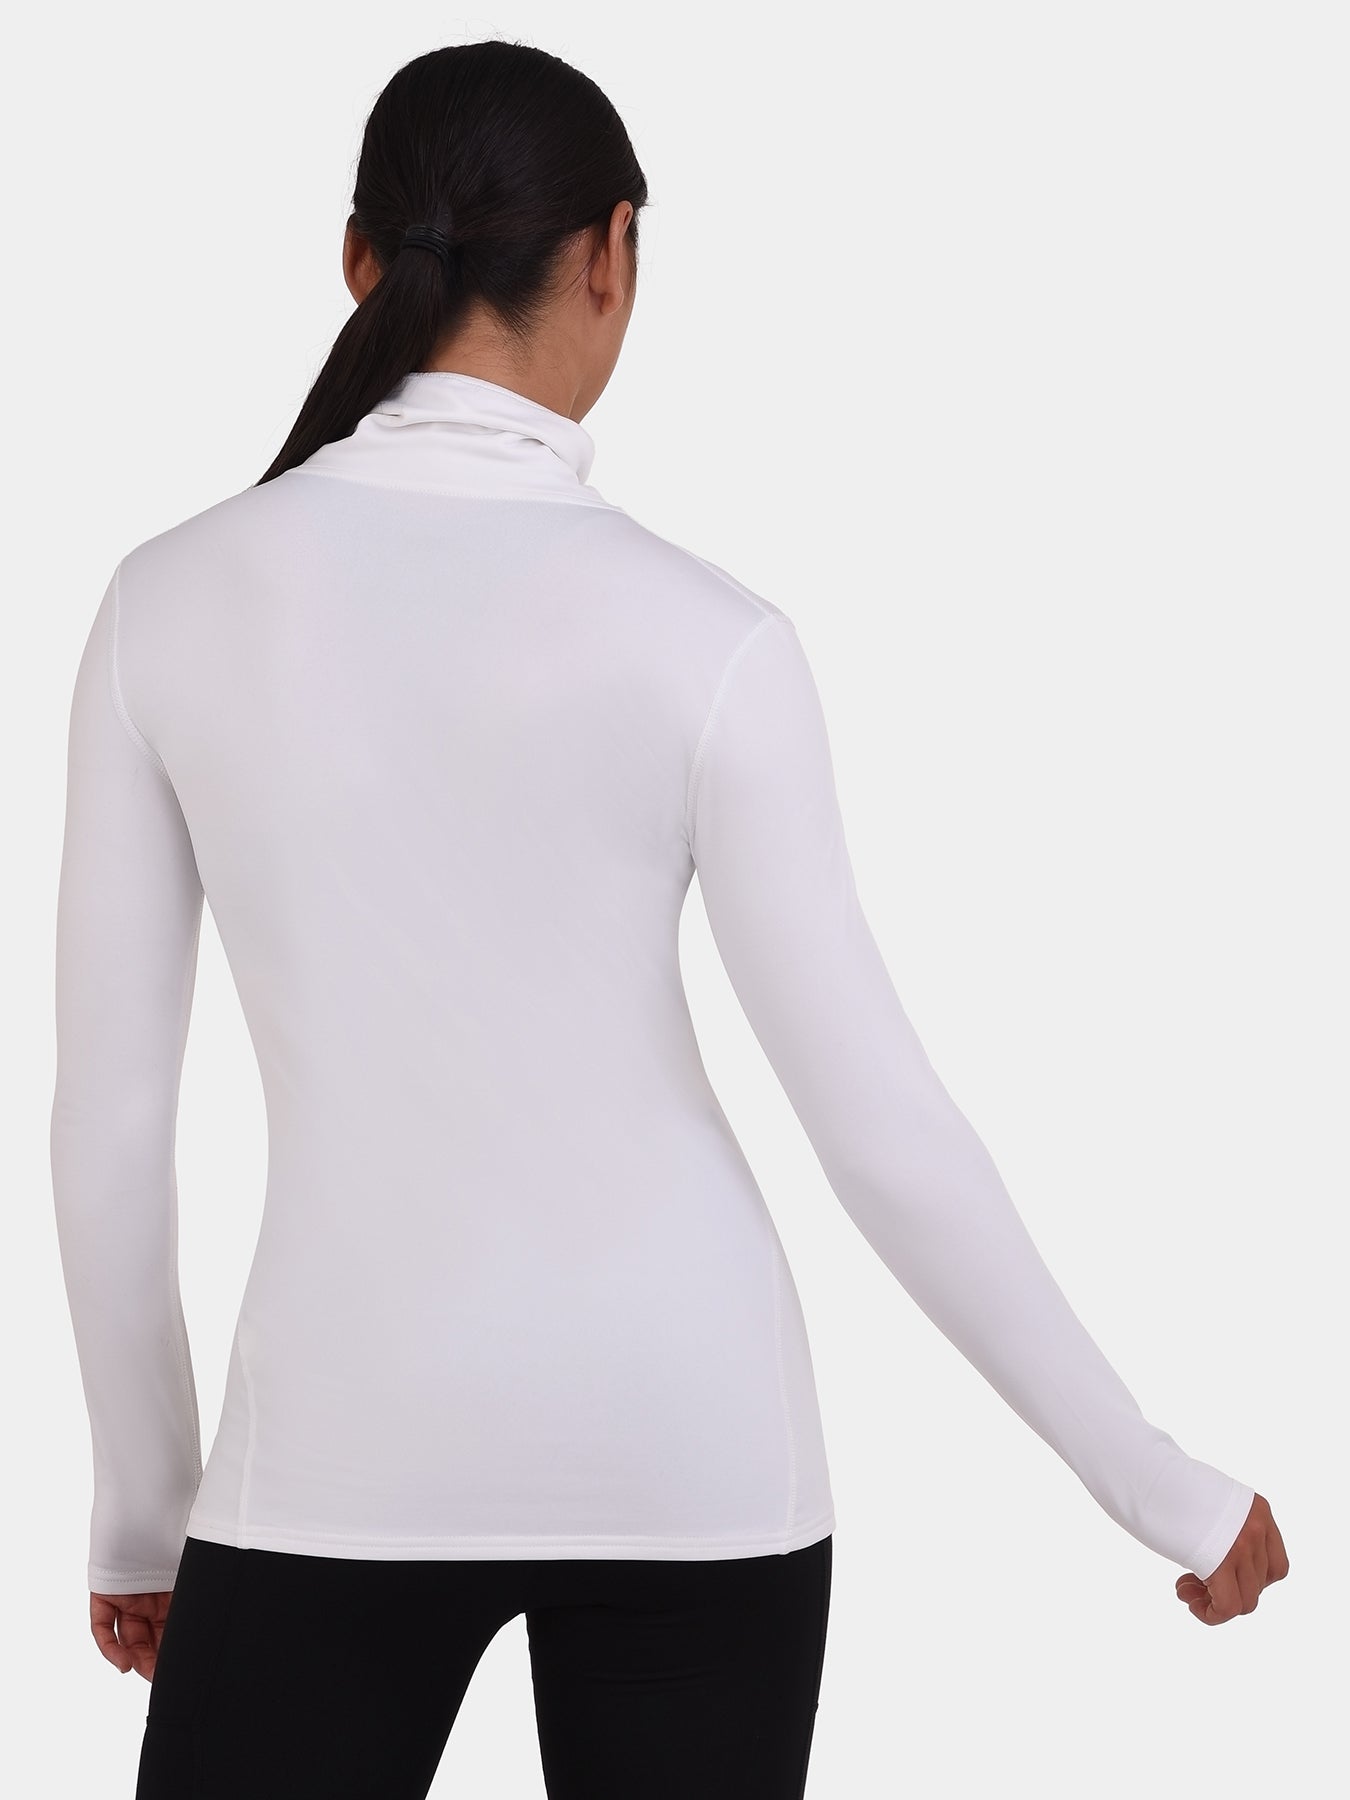 Warm-Up Thermal Long Sleeve Funnel Neck Top For Women With Brushed Inner Fabric, Thumbholes & Reflective Strips